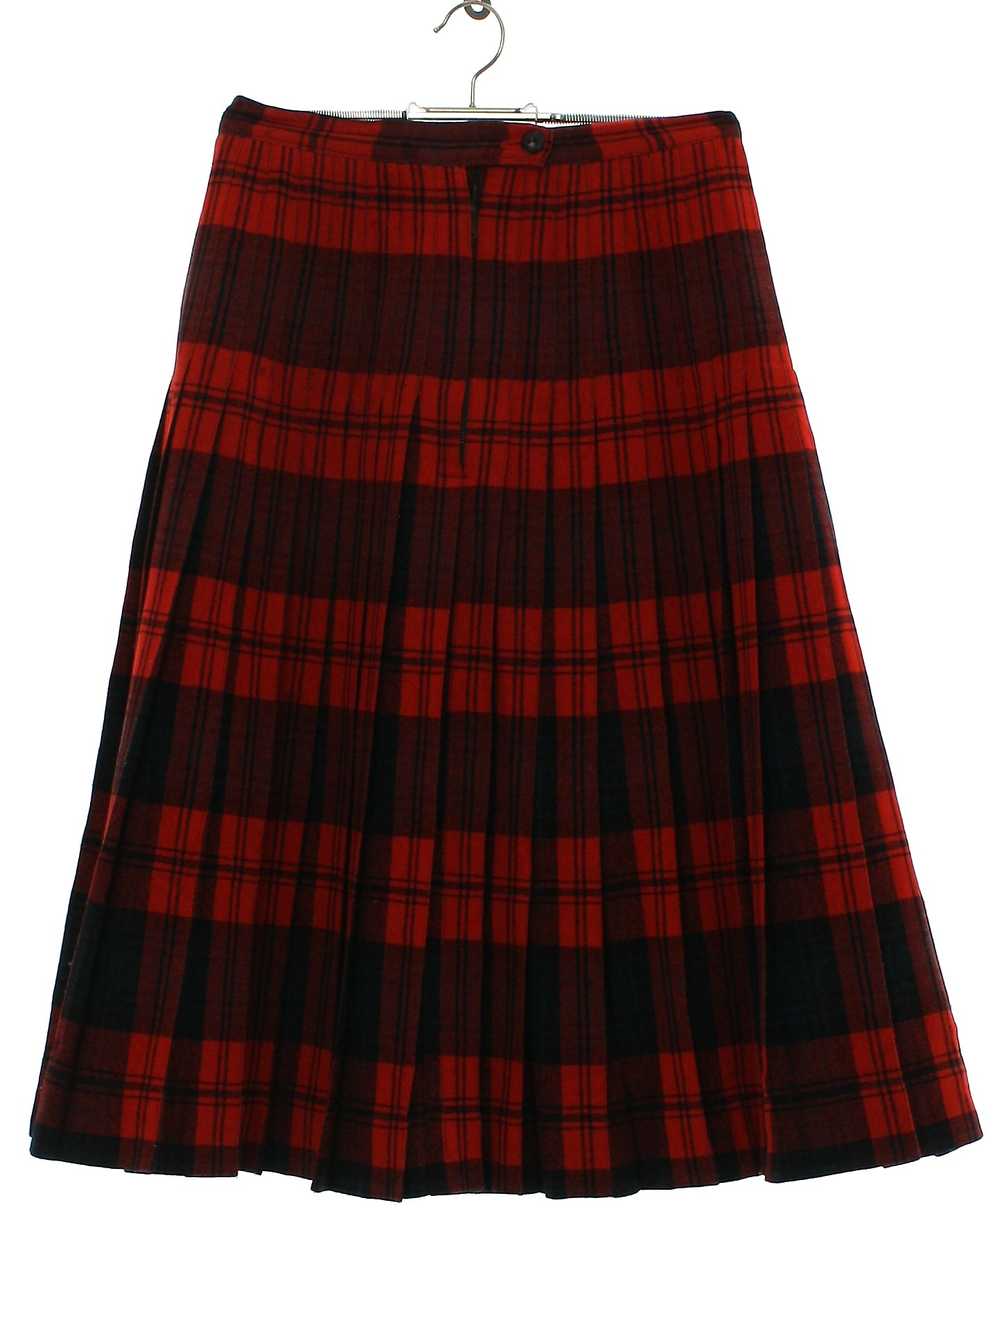 1950's In N Outer Pleated Plaid Wool Skirt - image 4